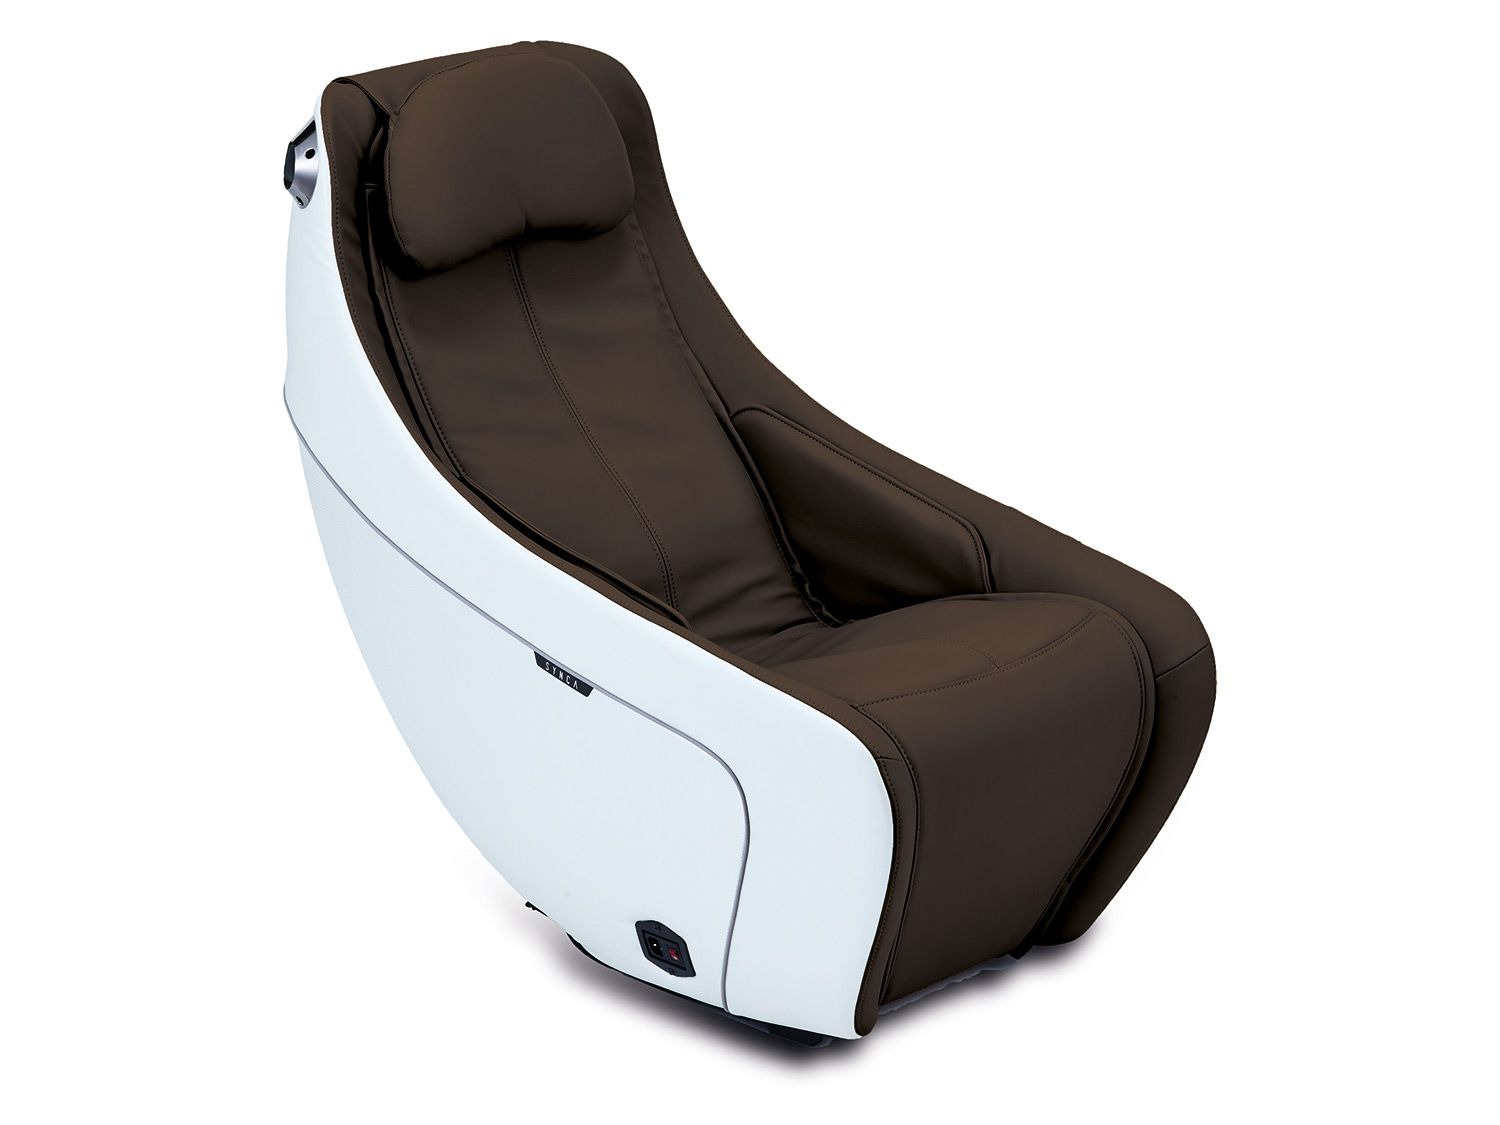 Synca CirC Compact Massagesessel Espresso | LIDL